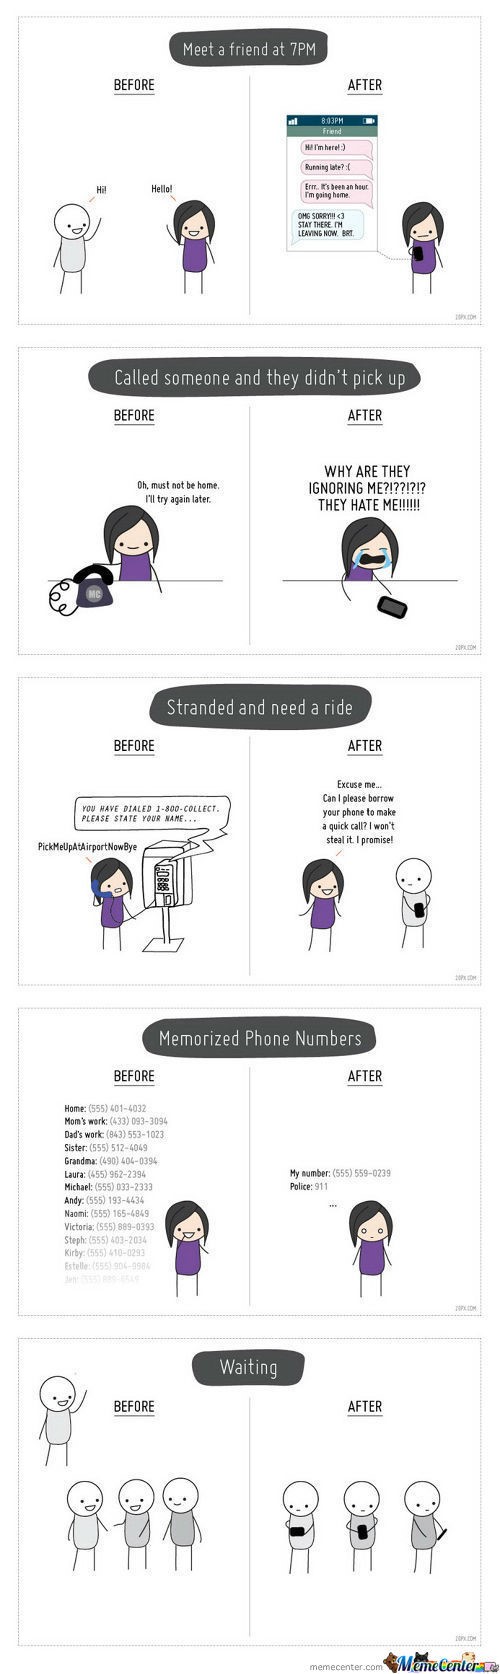 Cell phones before and after